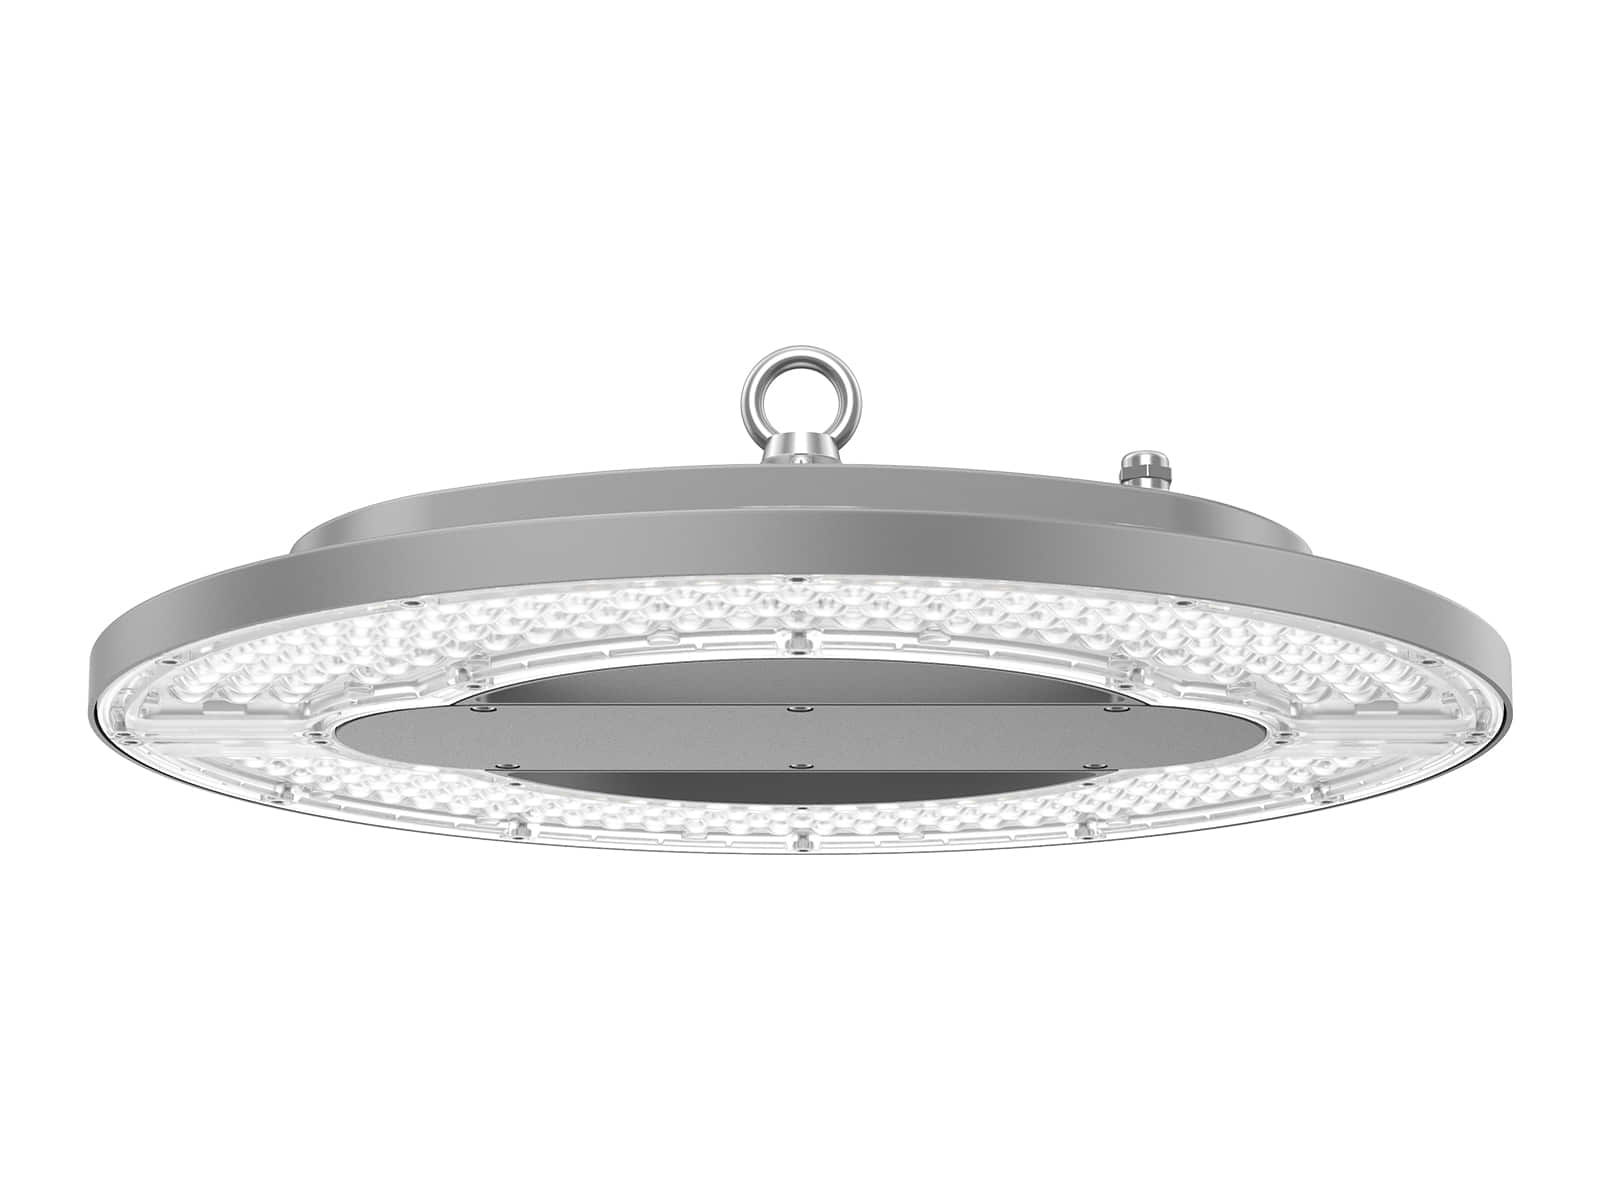 HB62 LED High Bay Light Up to 200lm/W